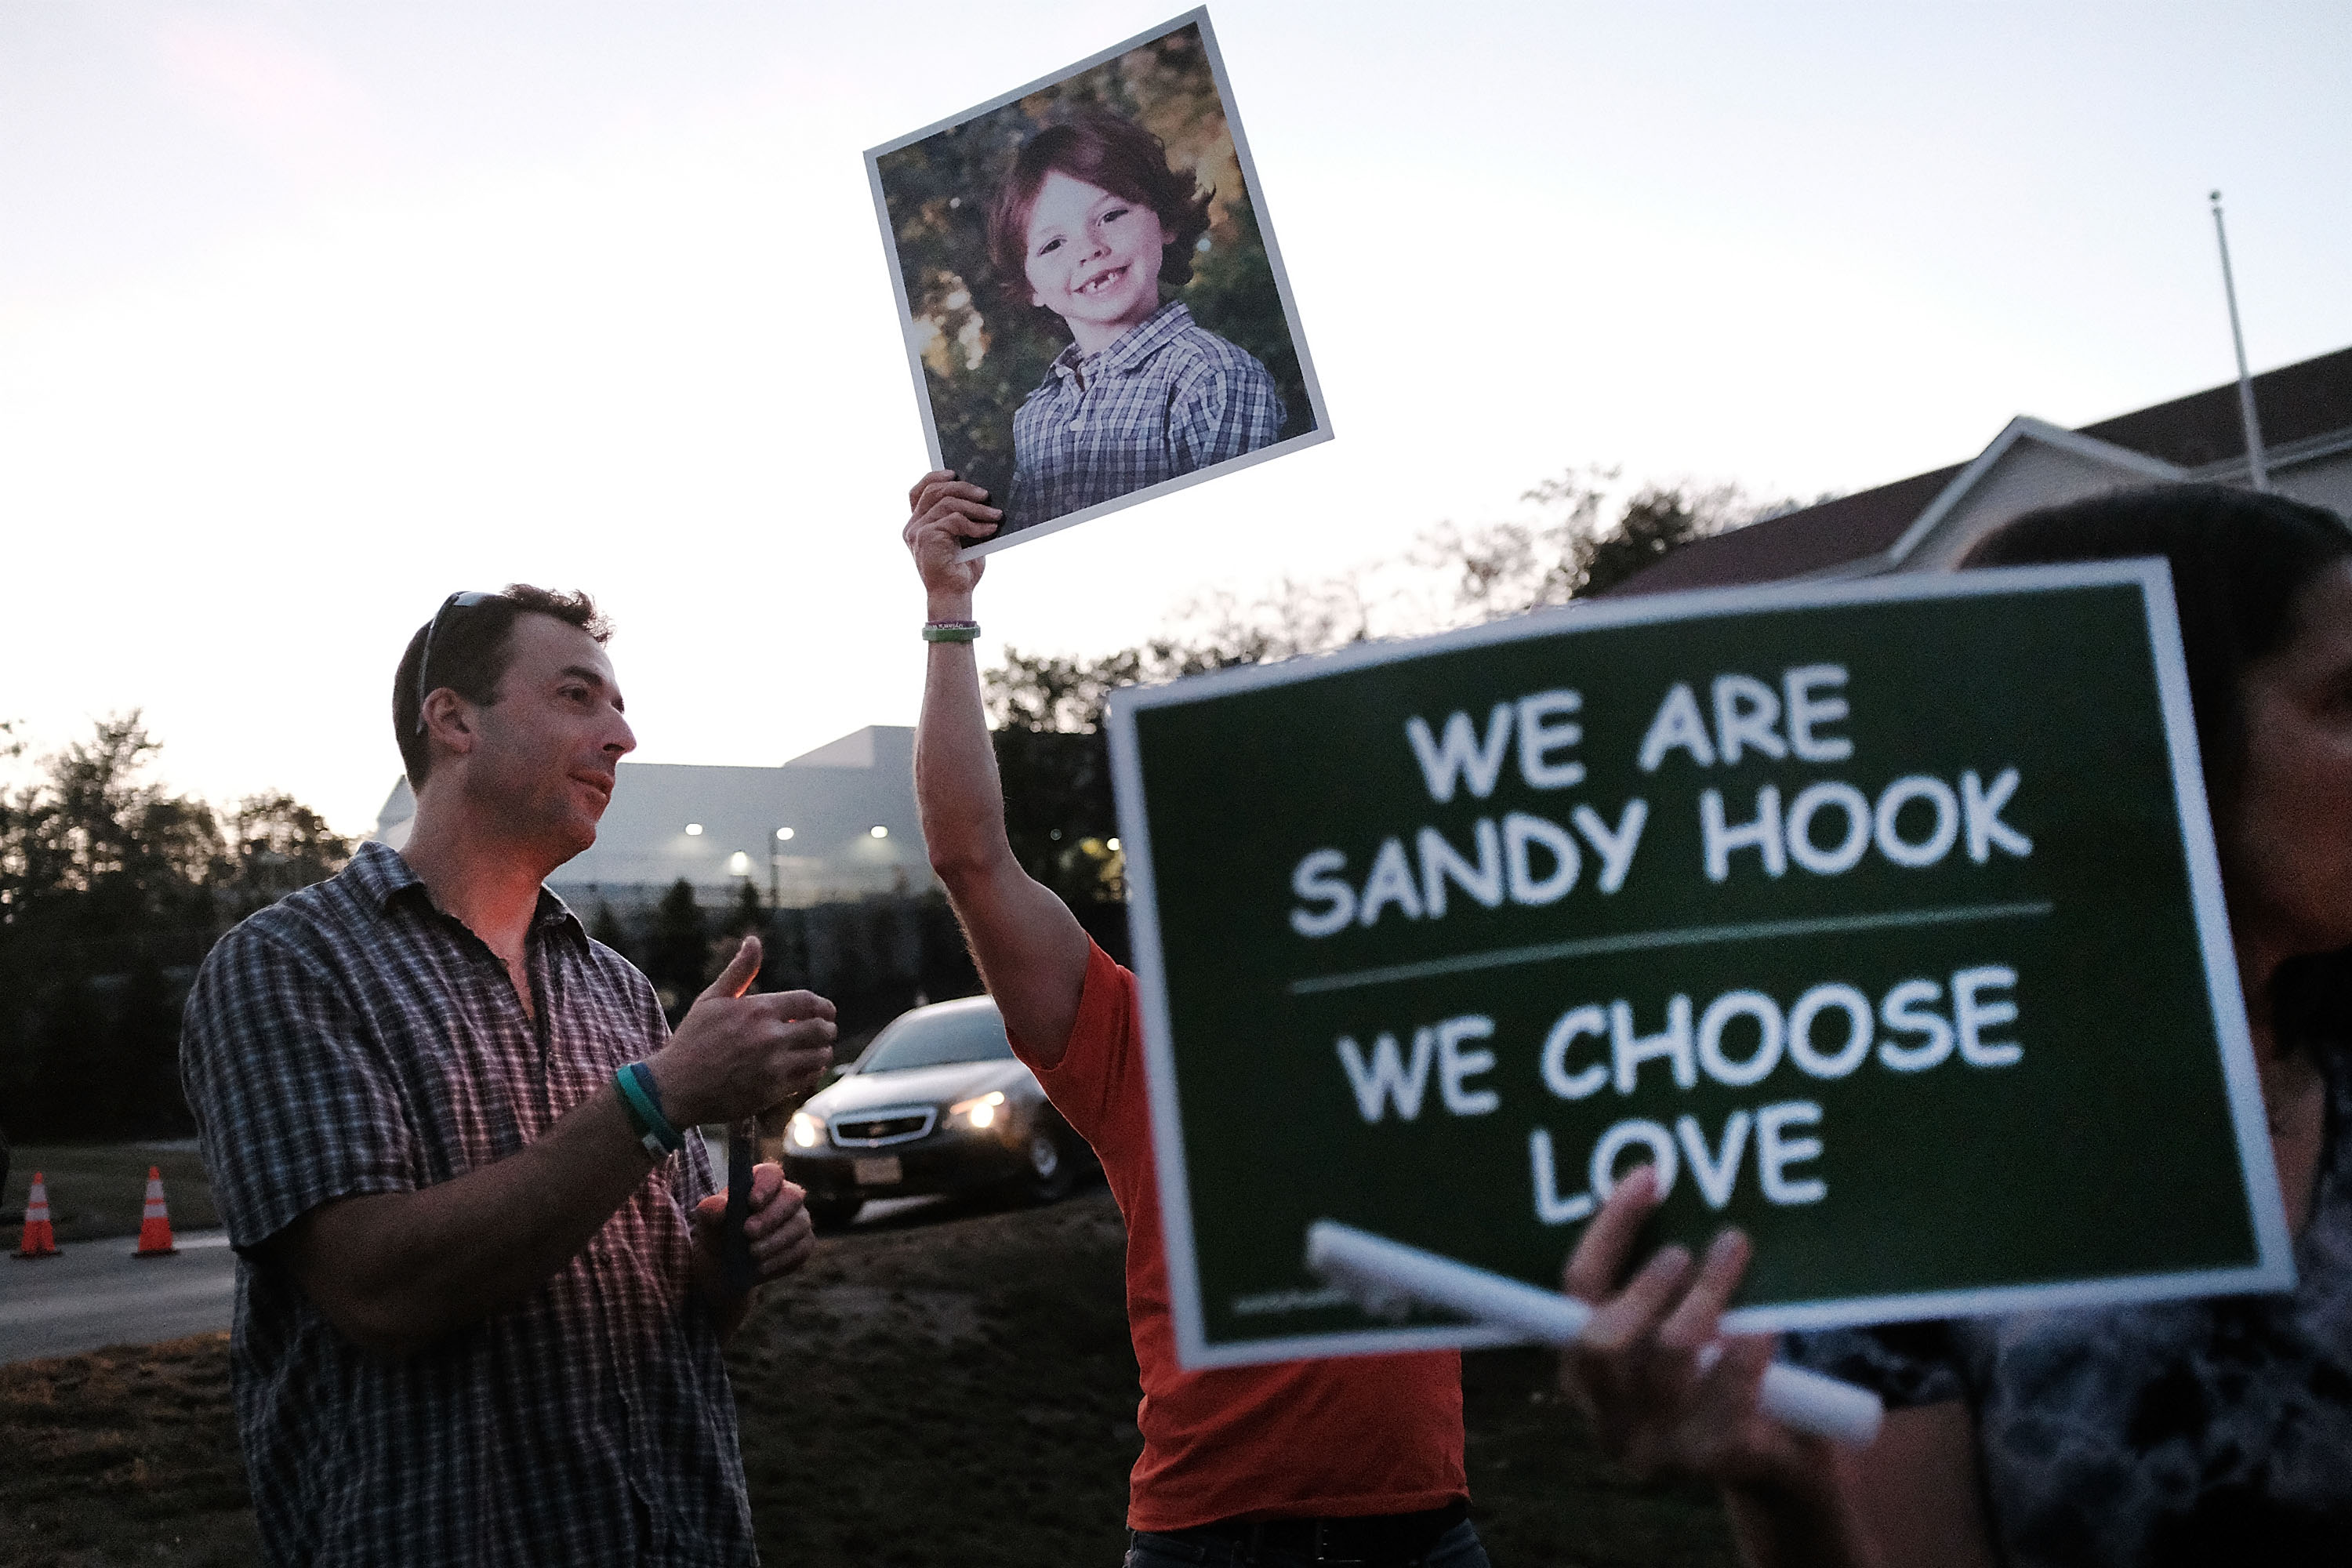 Mark Barden holds up a picture of his son, Daniel, on Oct 4, 2017, in Newtown, Conn. Daniel was one of 20 children killed in the Sandy Hook Elementary School massacre in December 2012. (Spencer Platt—Getty Images)